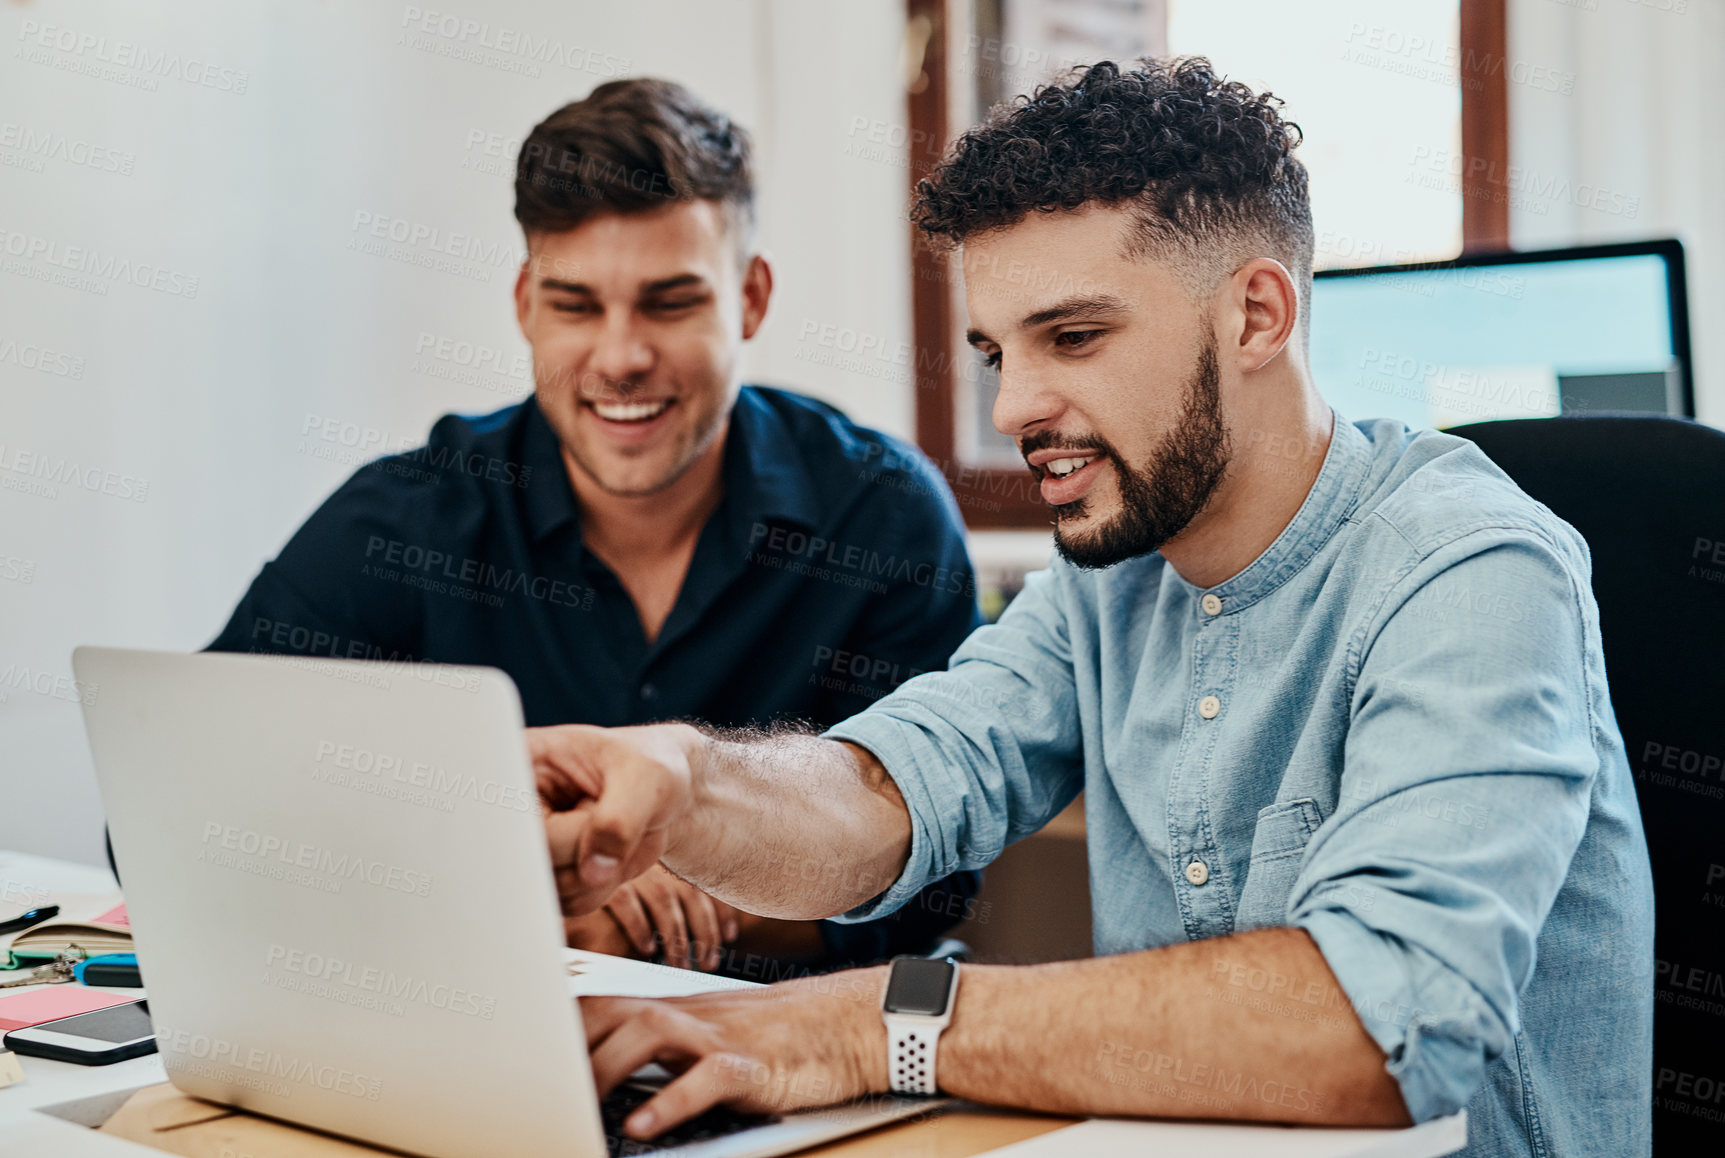 Buy stock photo Shot of two young businessmen using a laptop together in a modern office